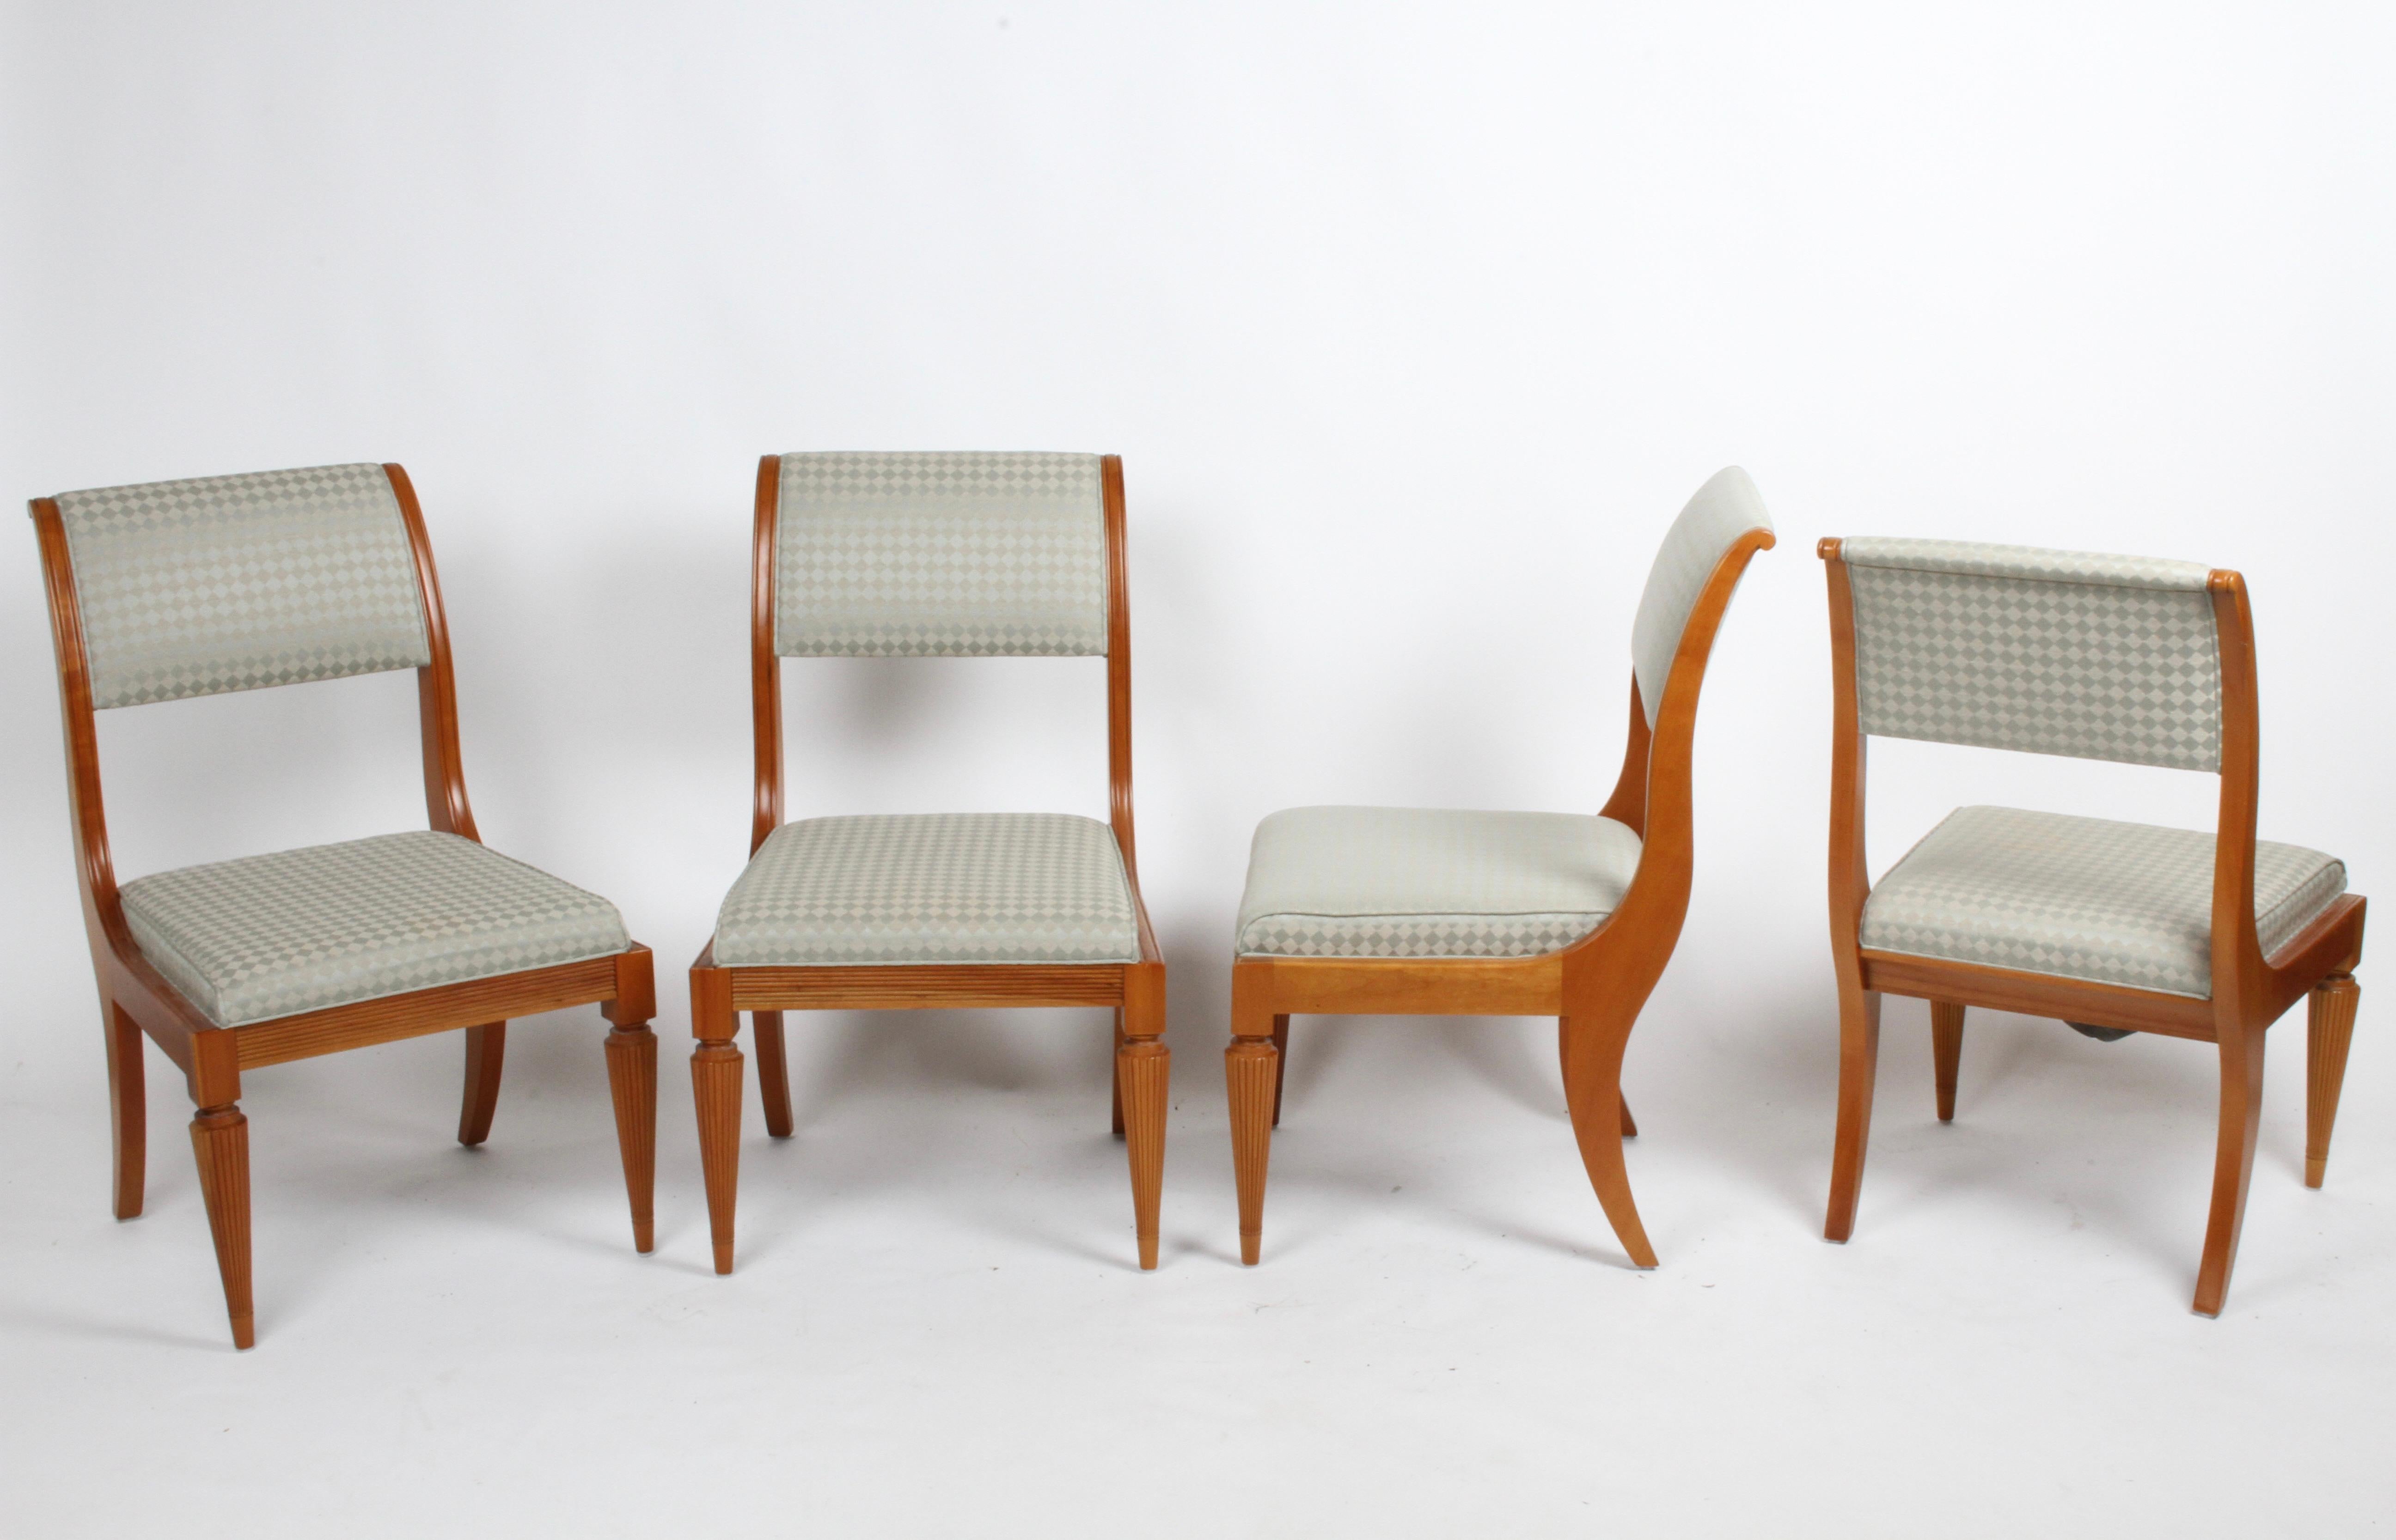 Rare set of six Robert A.M. Stern Architects designed dining chairs from his Bodleian chair series for HBF. Set includes 2 arm chairs #3125-10 , 4 sides chairs #3126-10 in natural cherry hardwood frames, upholstered in Arclecchino check, color 52860